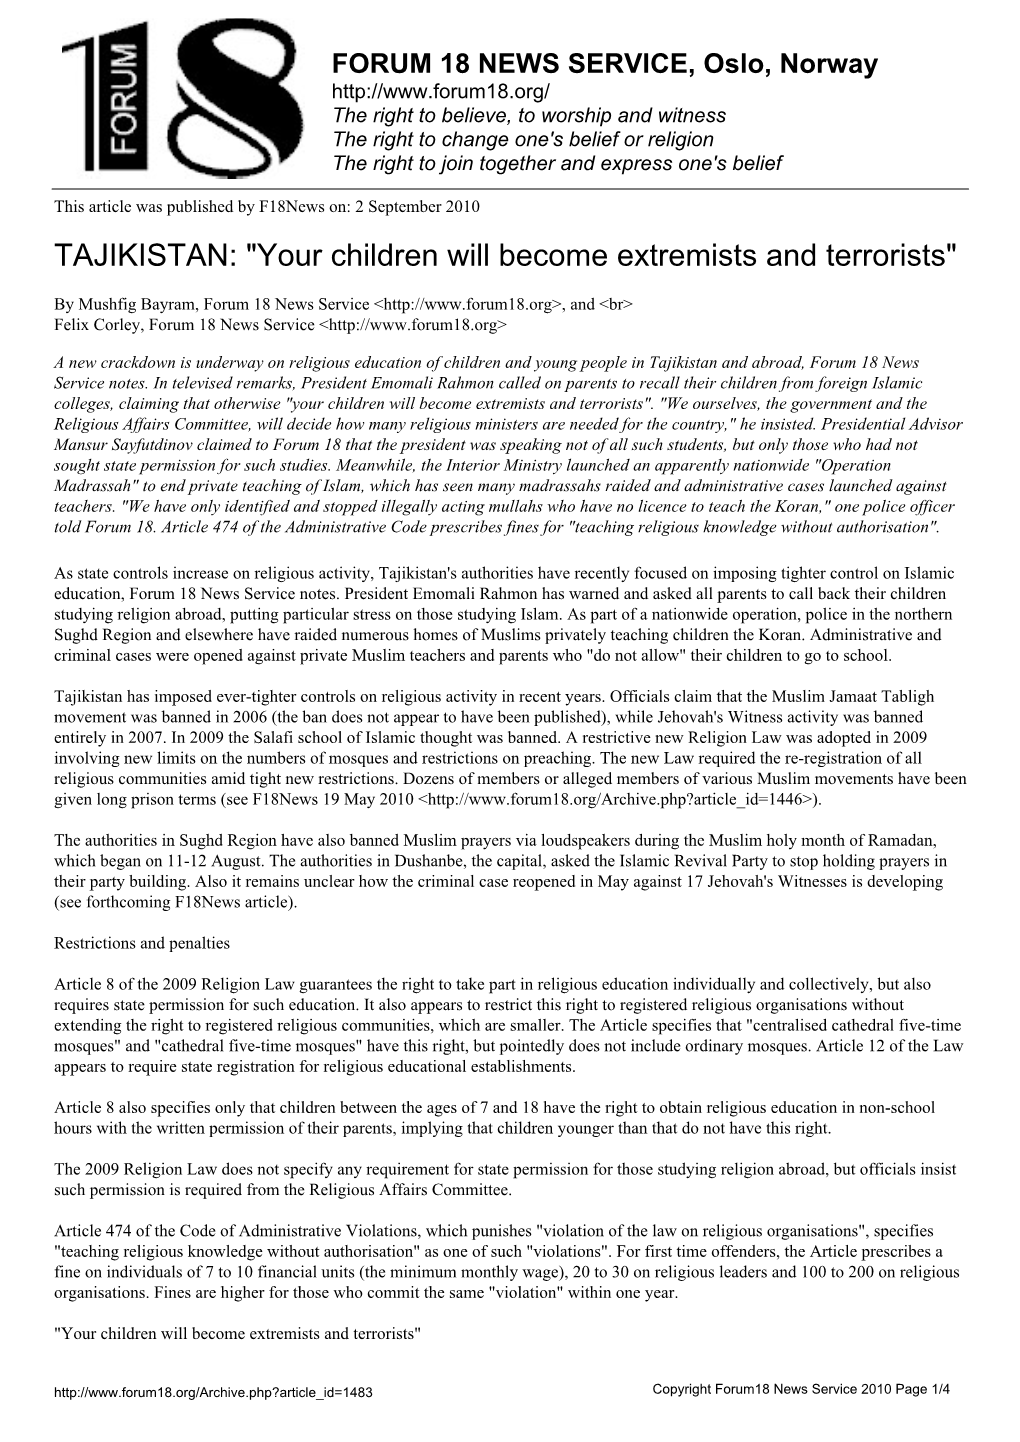 Your Children Will Become Extremists and Terrorists"